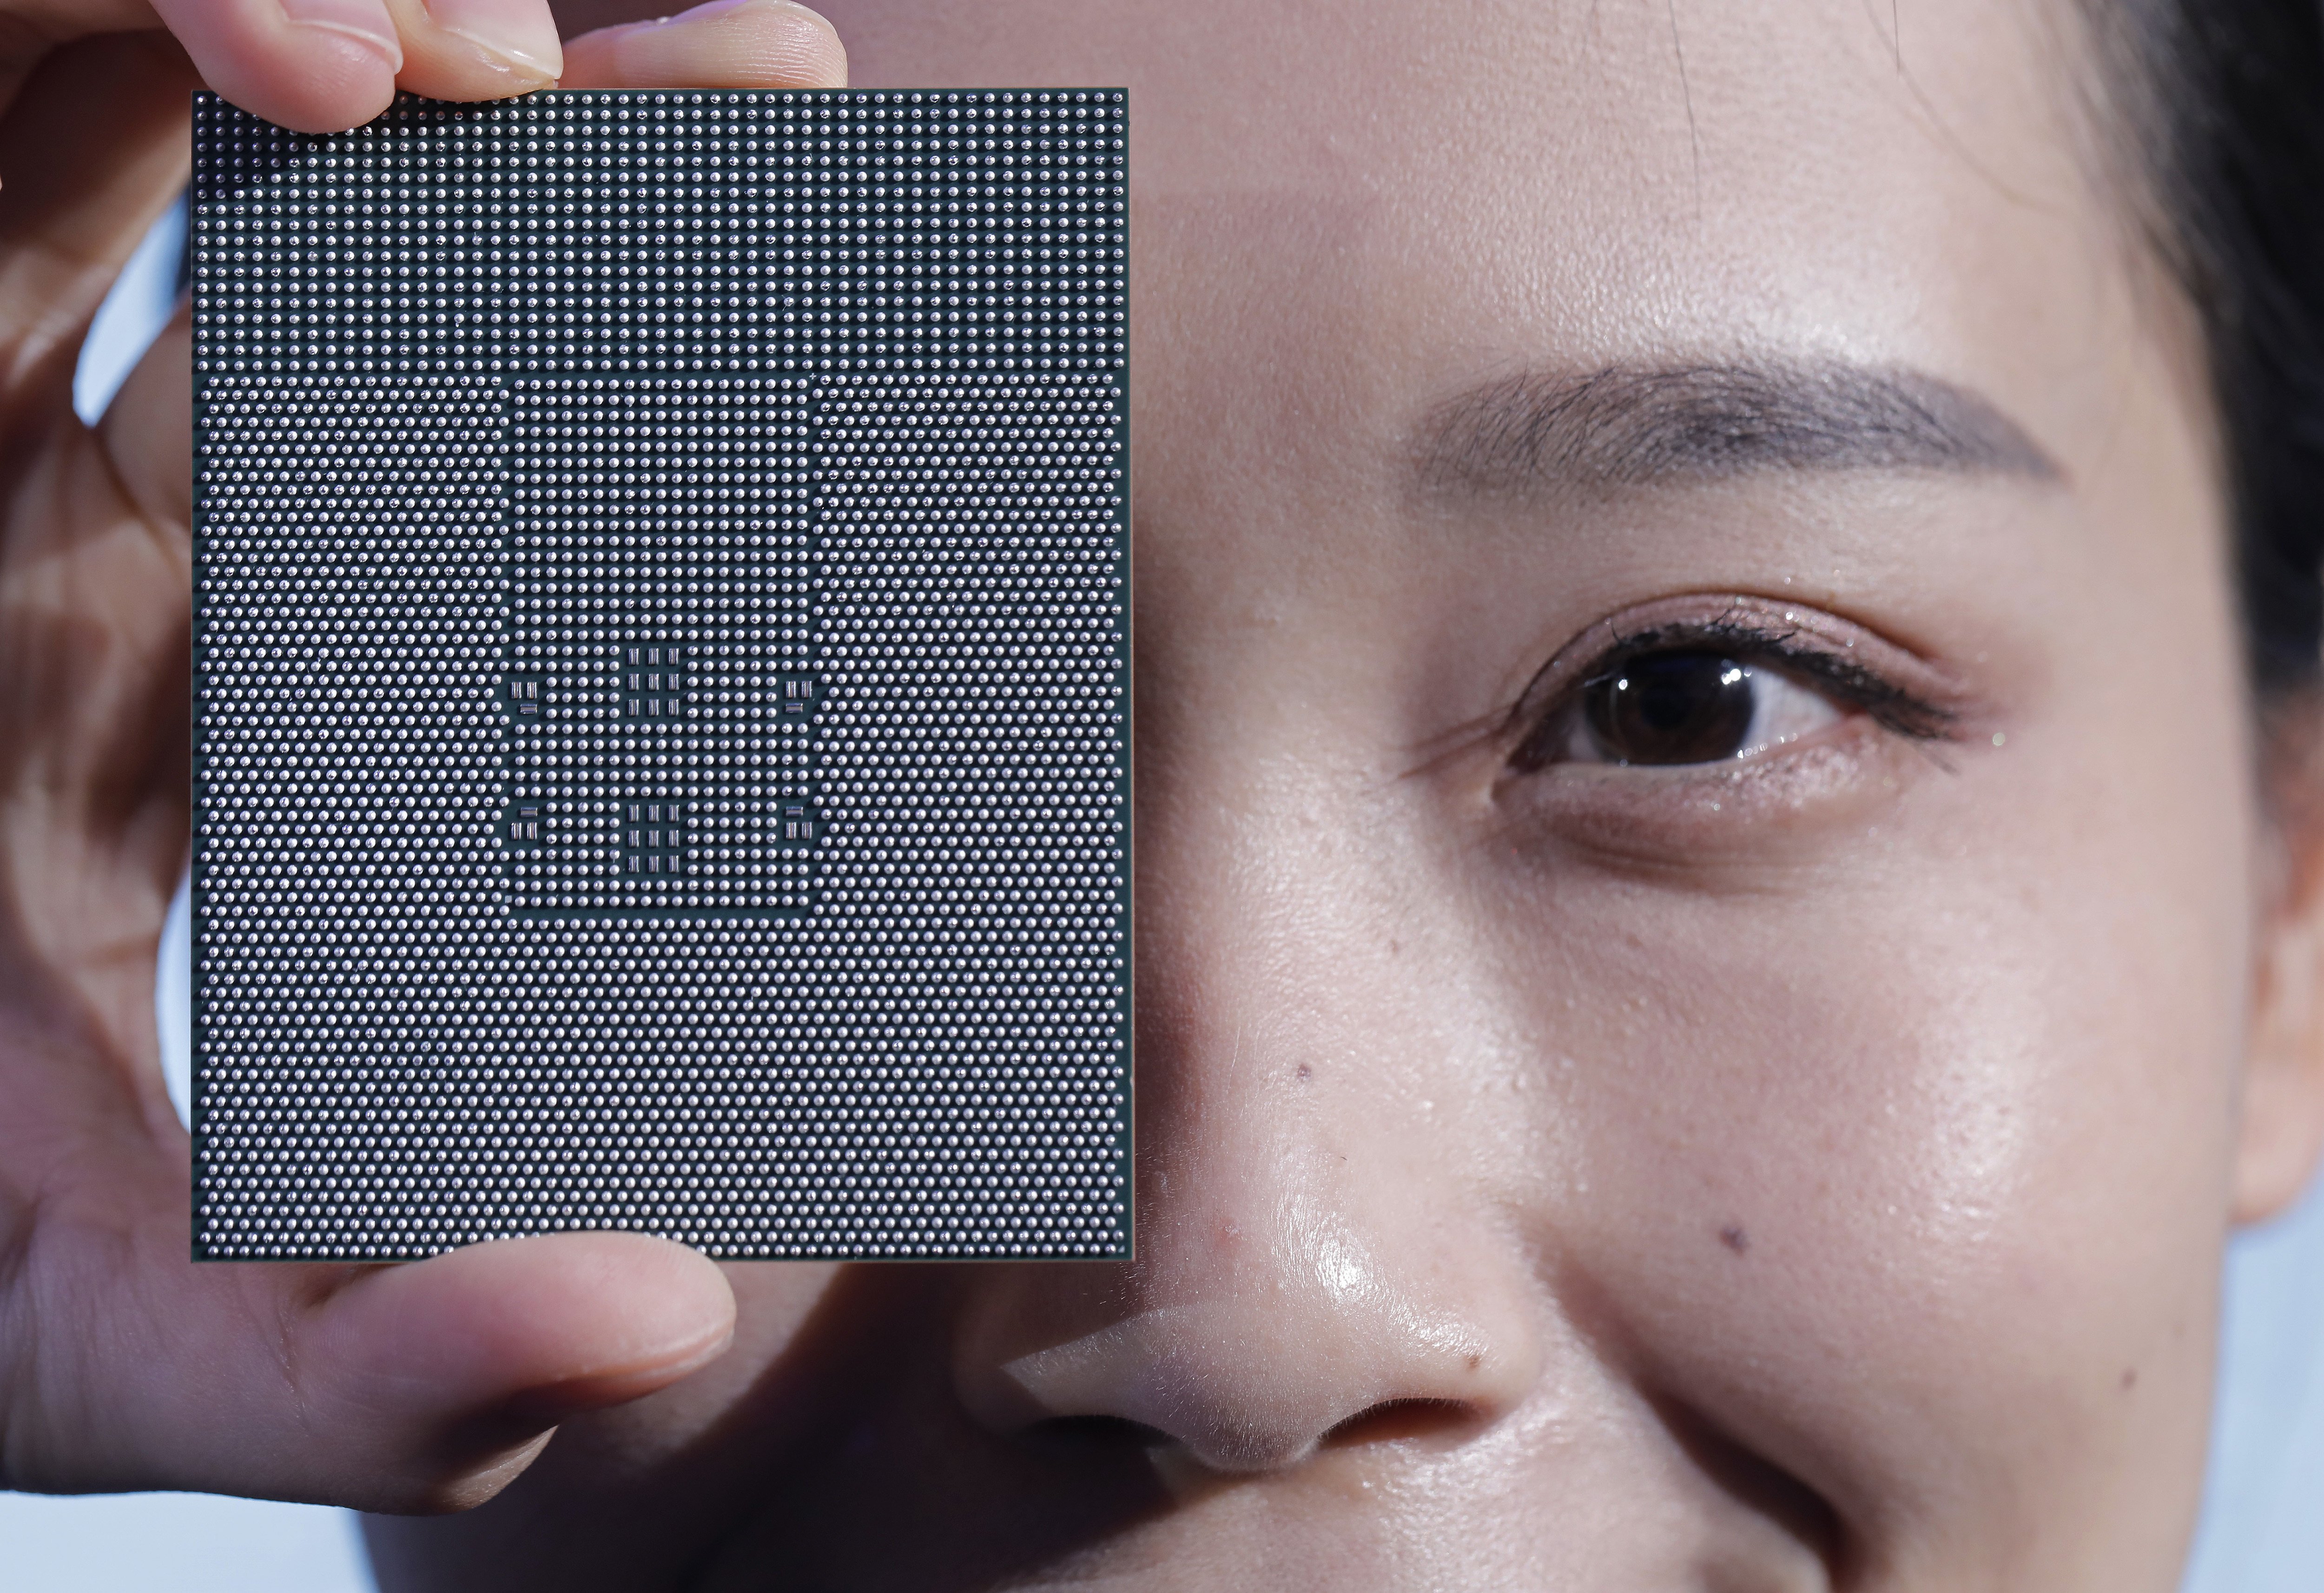 A Kunpeng 920 chip is unveiled by Chinese telecom giant Huawei during a ceremony in Shenzhen. China is prioritising the development of its semiconductor sector as the US restricts exports of technology. Photo: AP